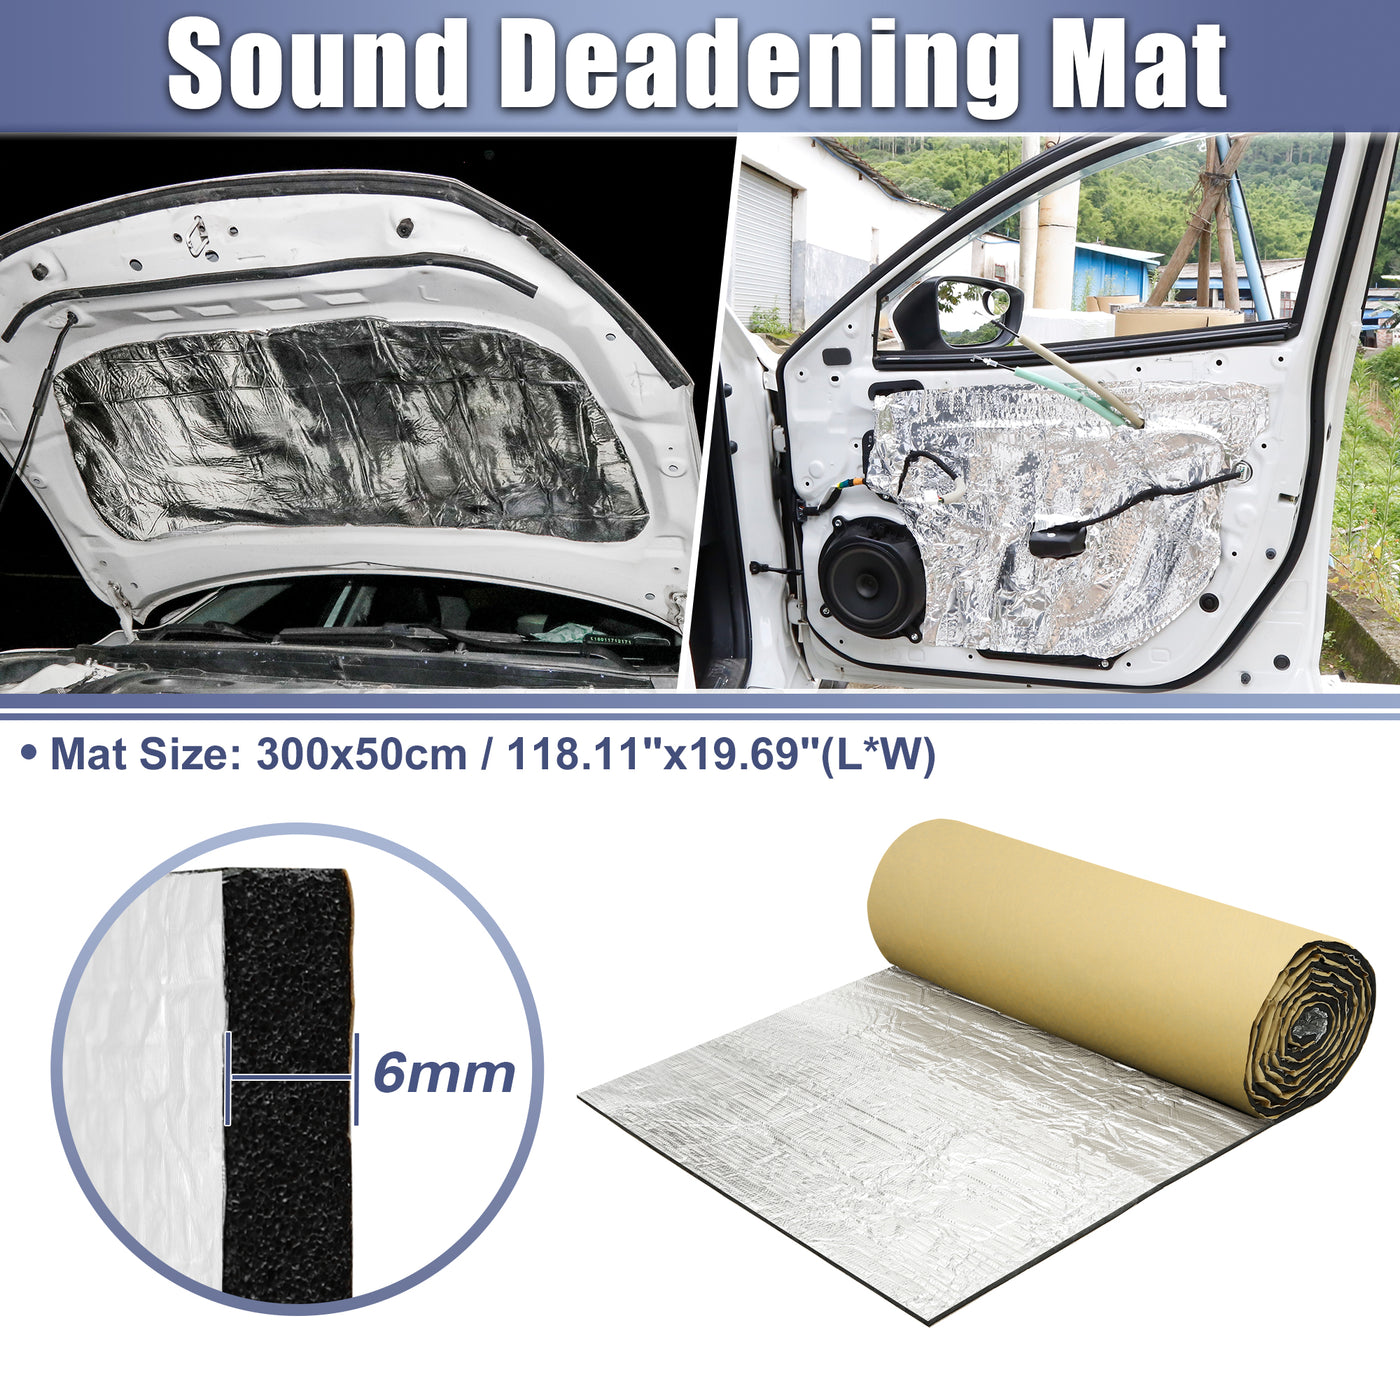 X AUTOHAUX 236mil 6mm 16.14sqft Car Sound Deadening Mat Aluminum Closed Cell Foam Heat Shield Material Damping Self Adhesive Universal for Hood Fender and Boat Engine Cover 118.11"x19.69"